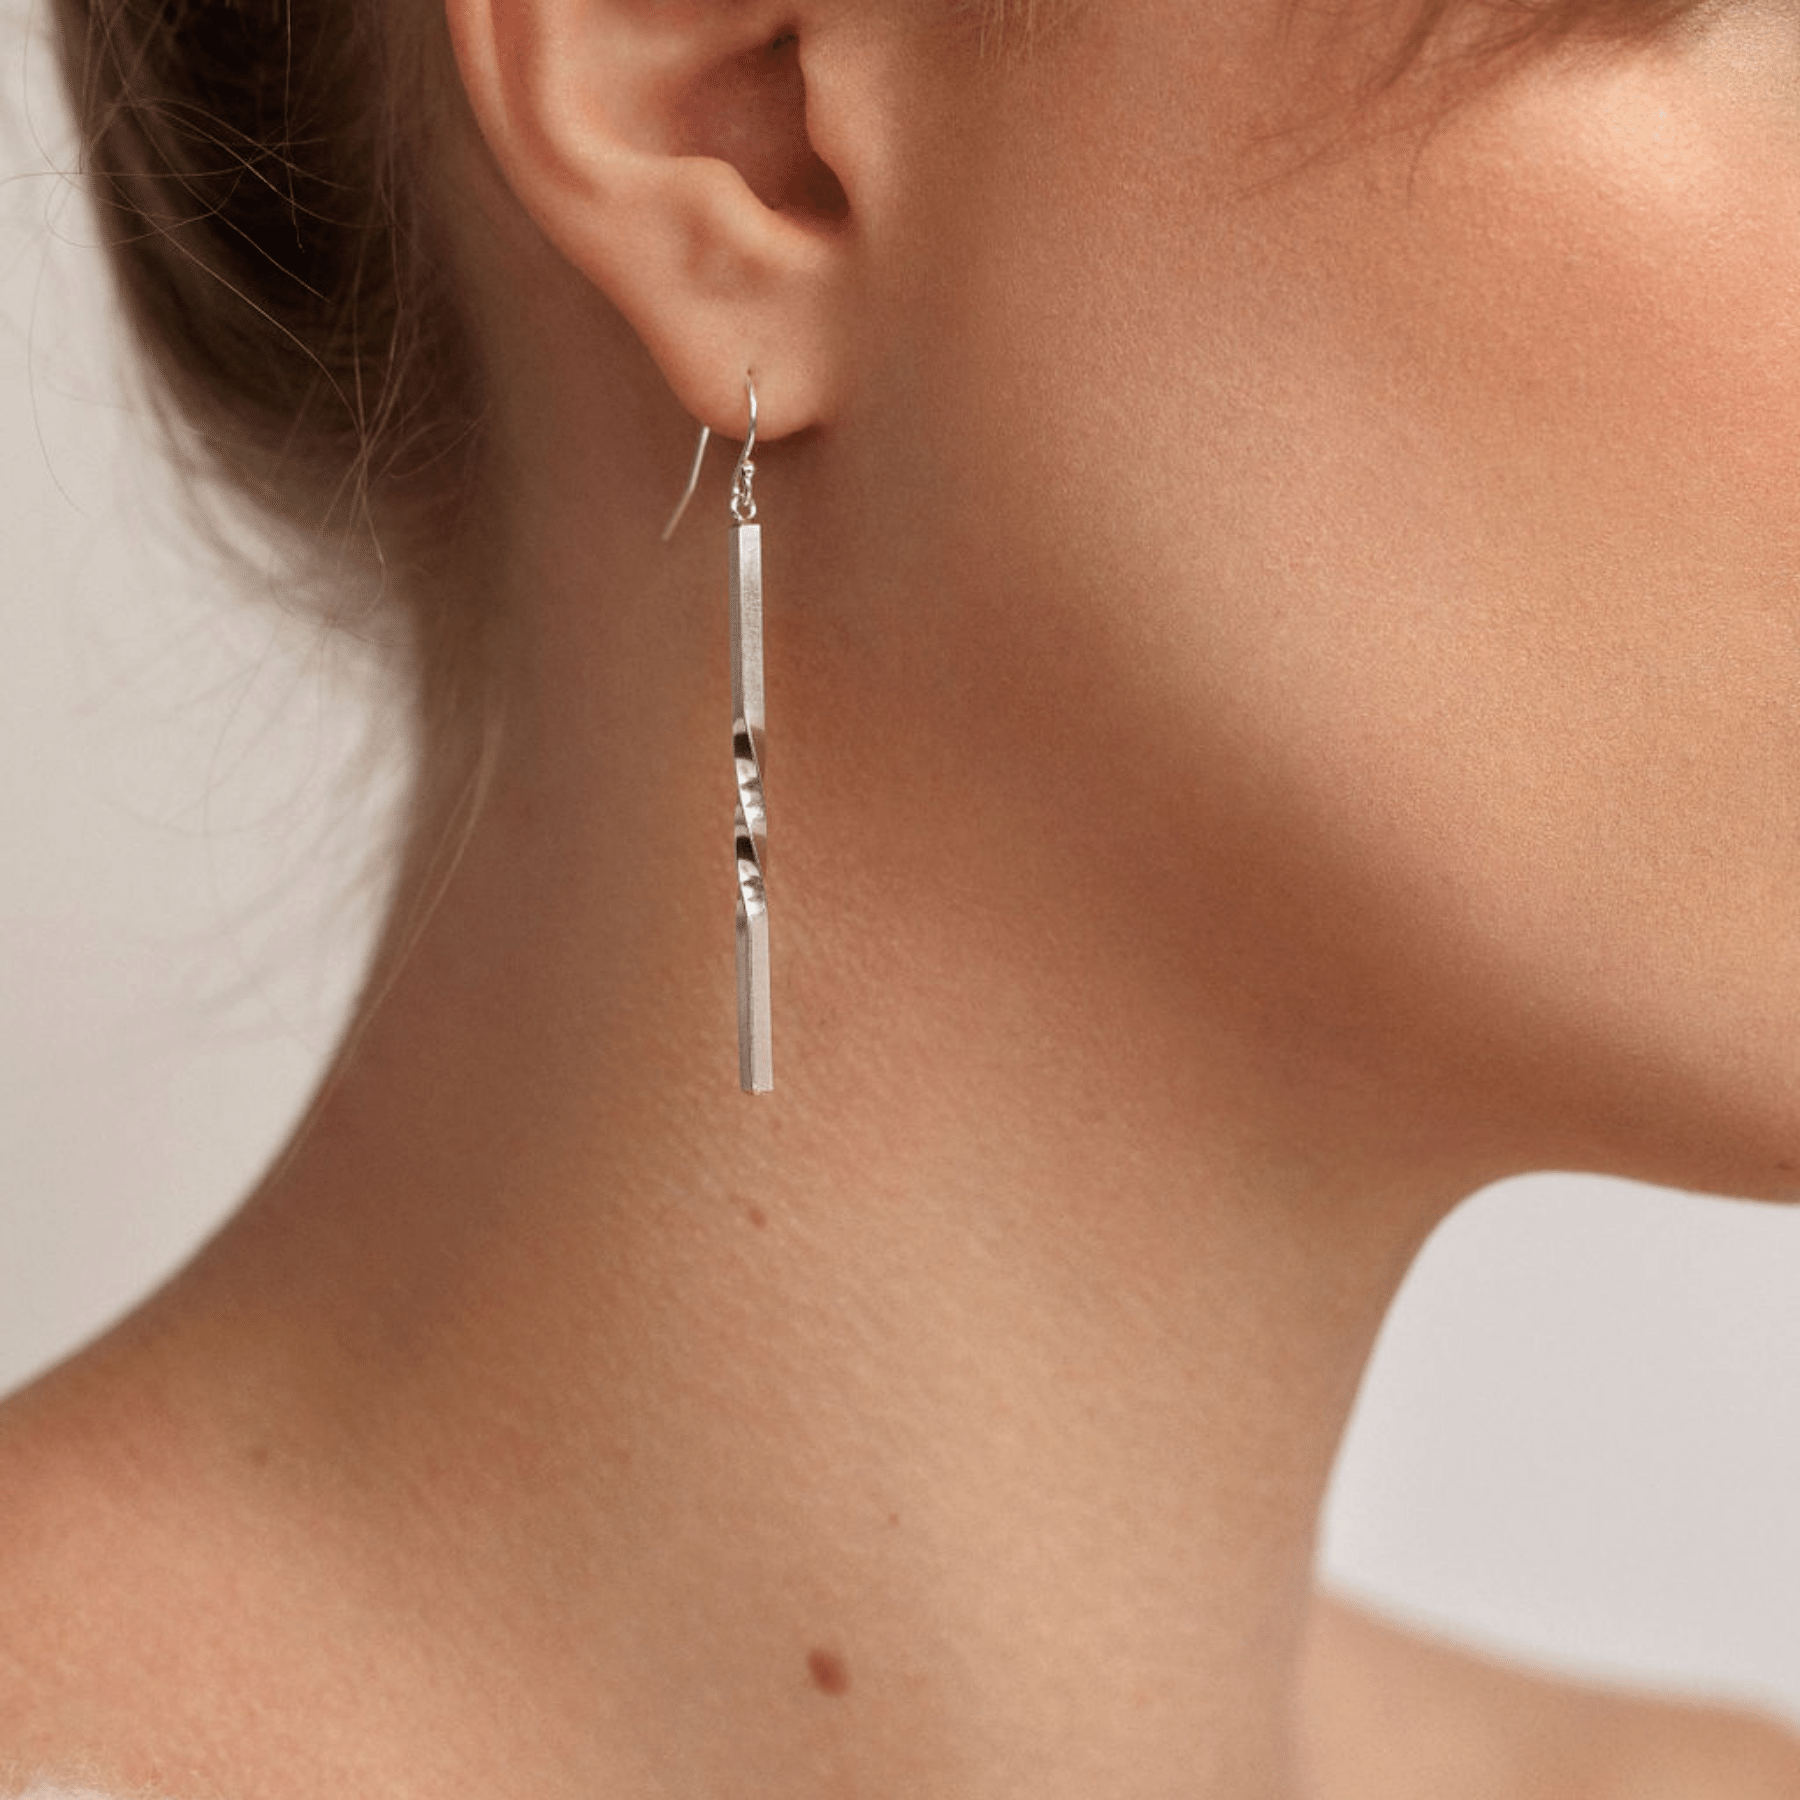 Minimalist vertical bar-shaped earrings with a single twist in the center and a fish hook ear wire in sterling silver..